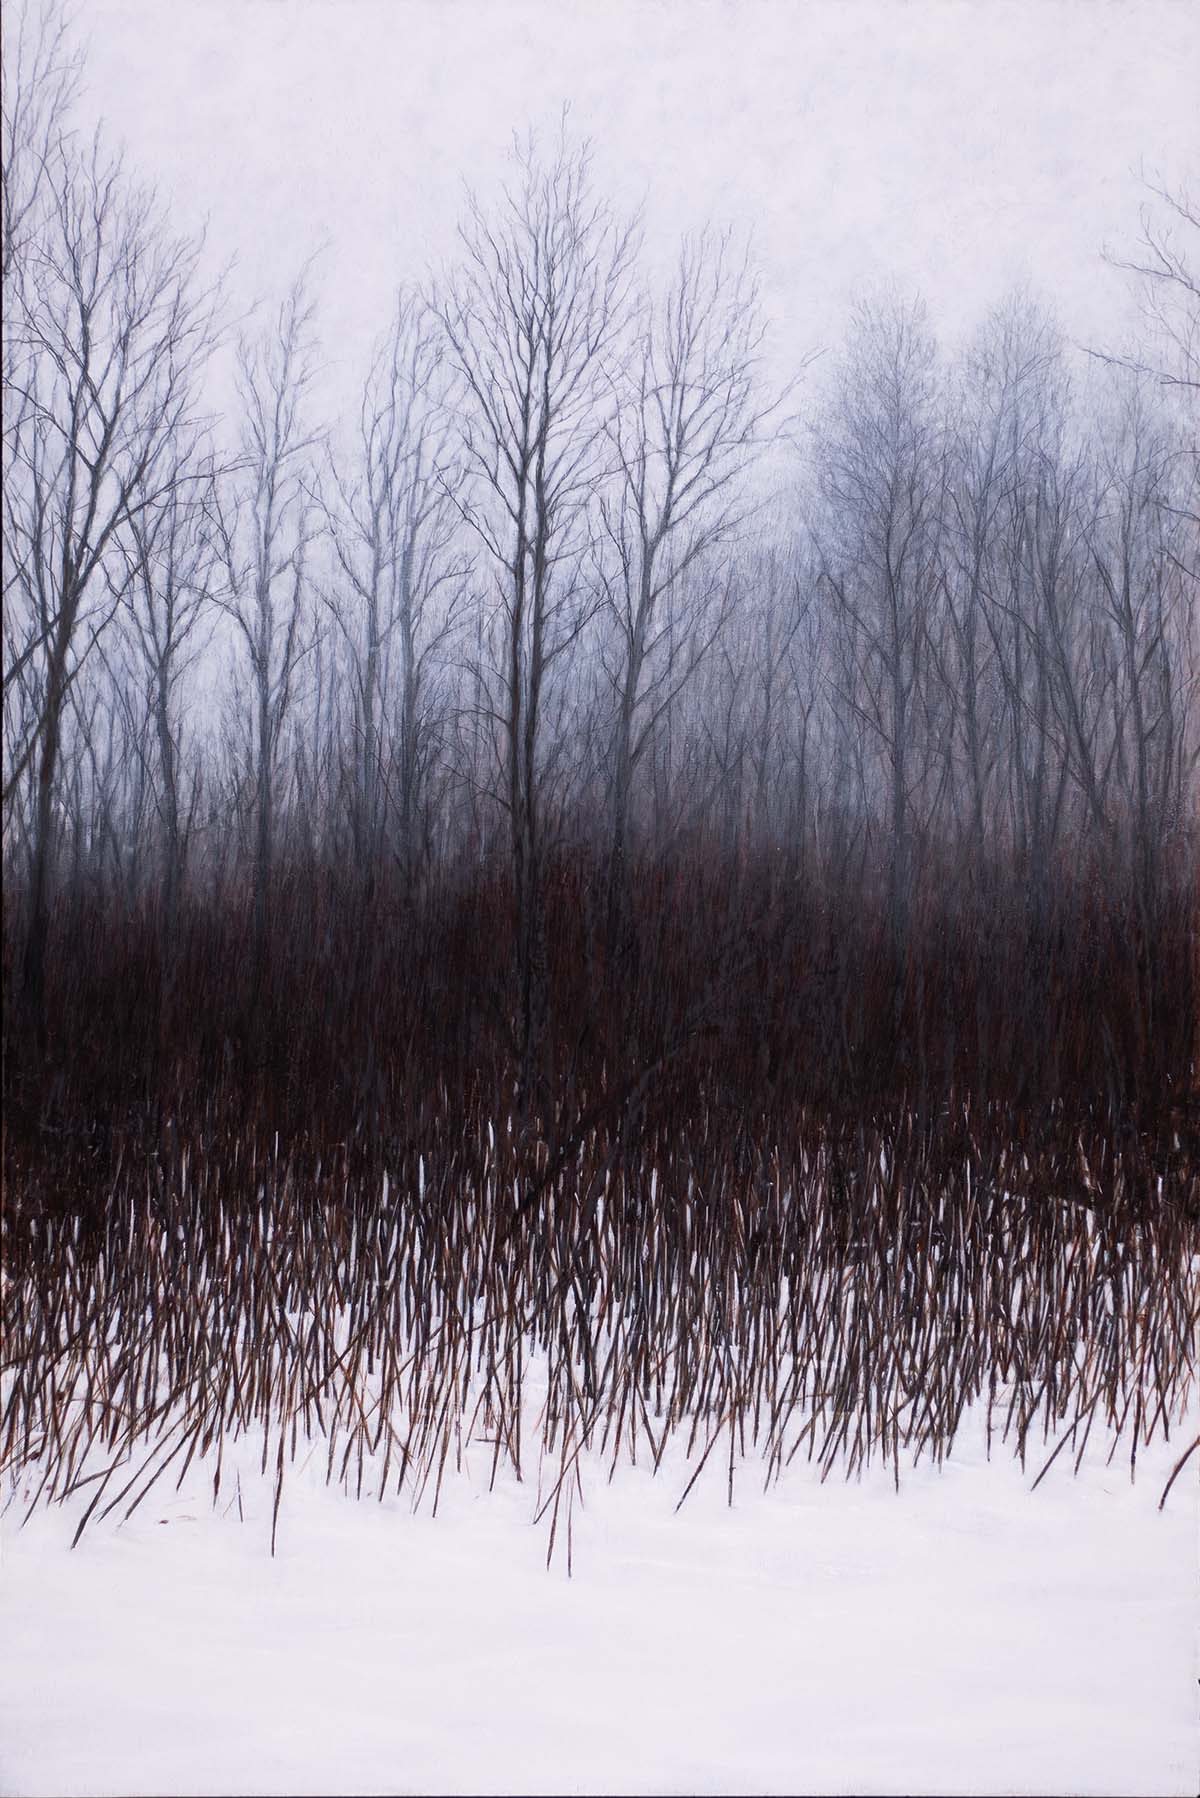 oil painting field covered snow; bare trees in background